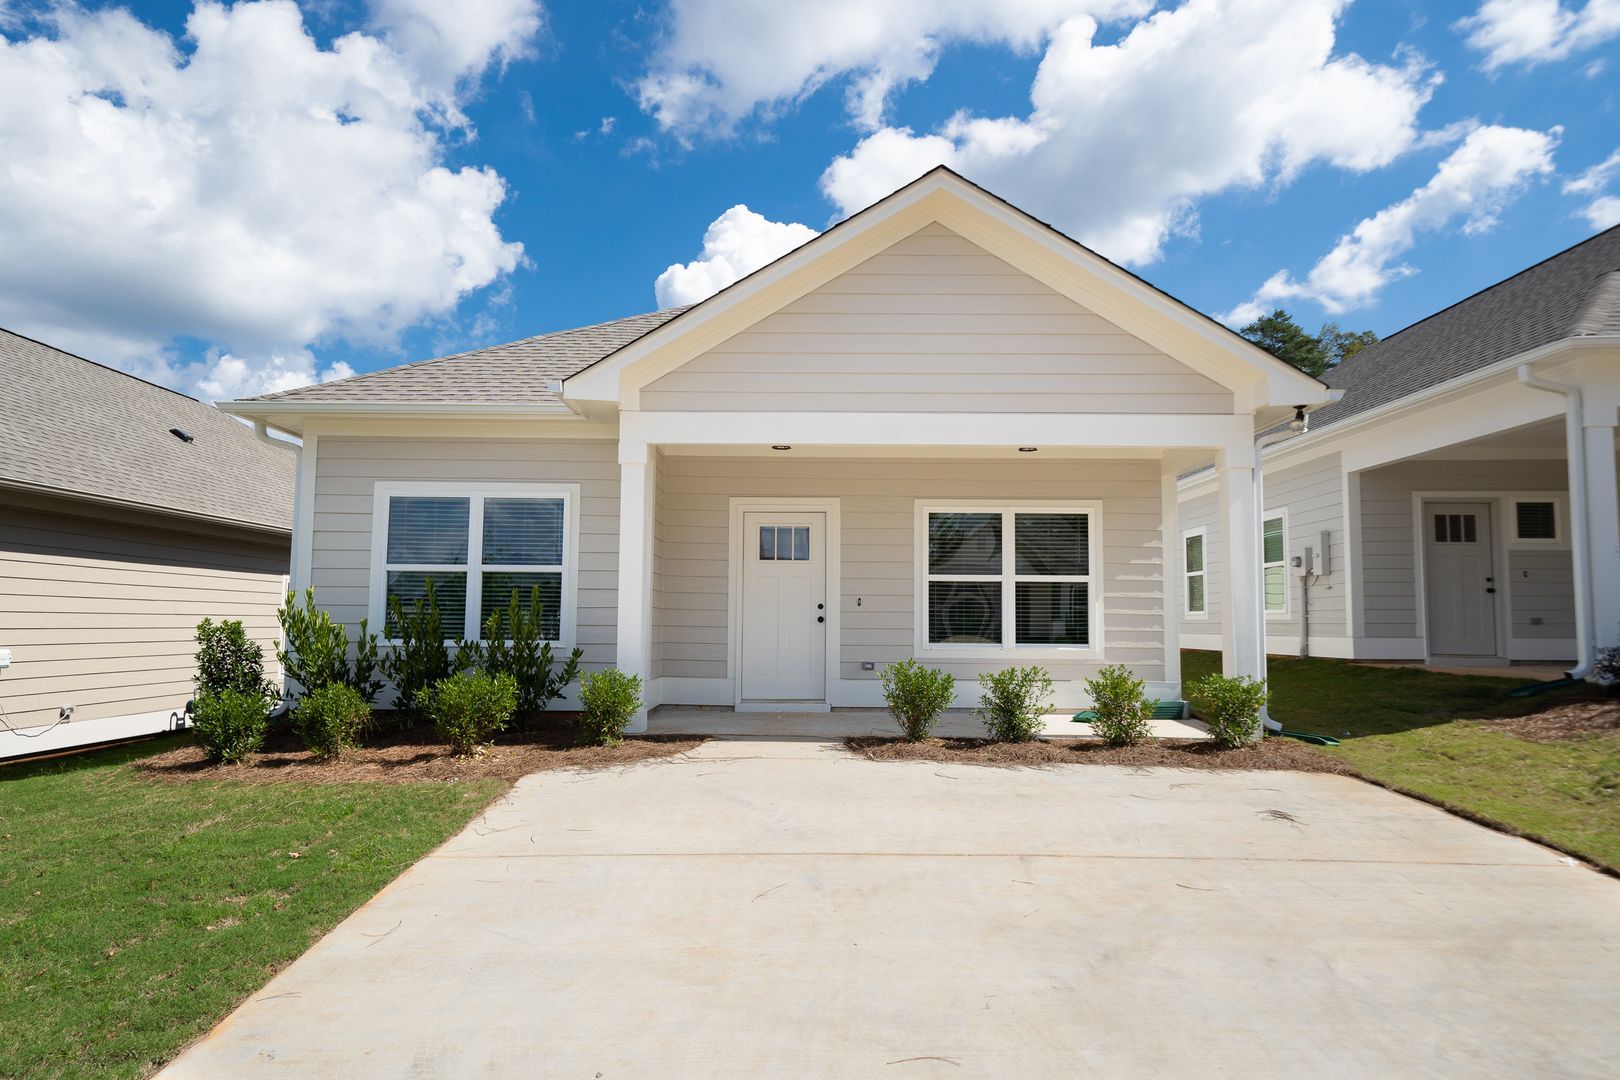 A new home exterior of homes for rent in Leeds Alabama